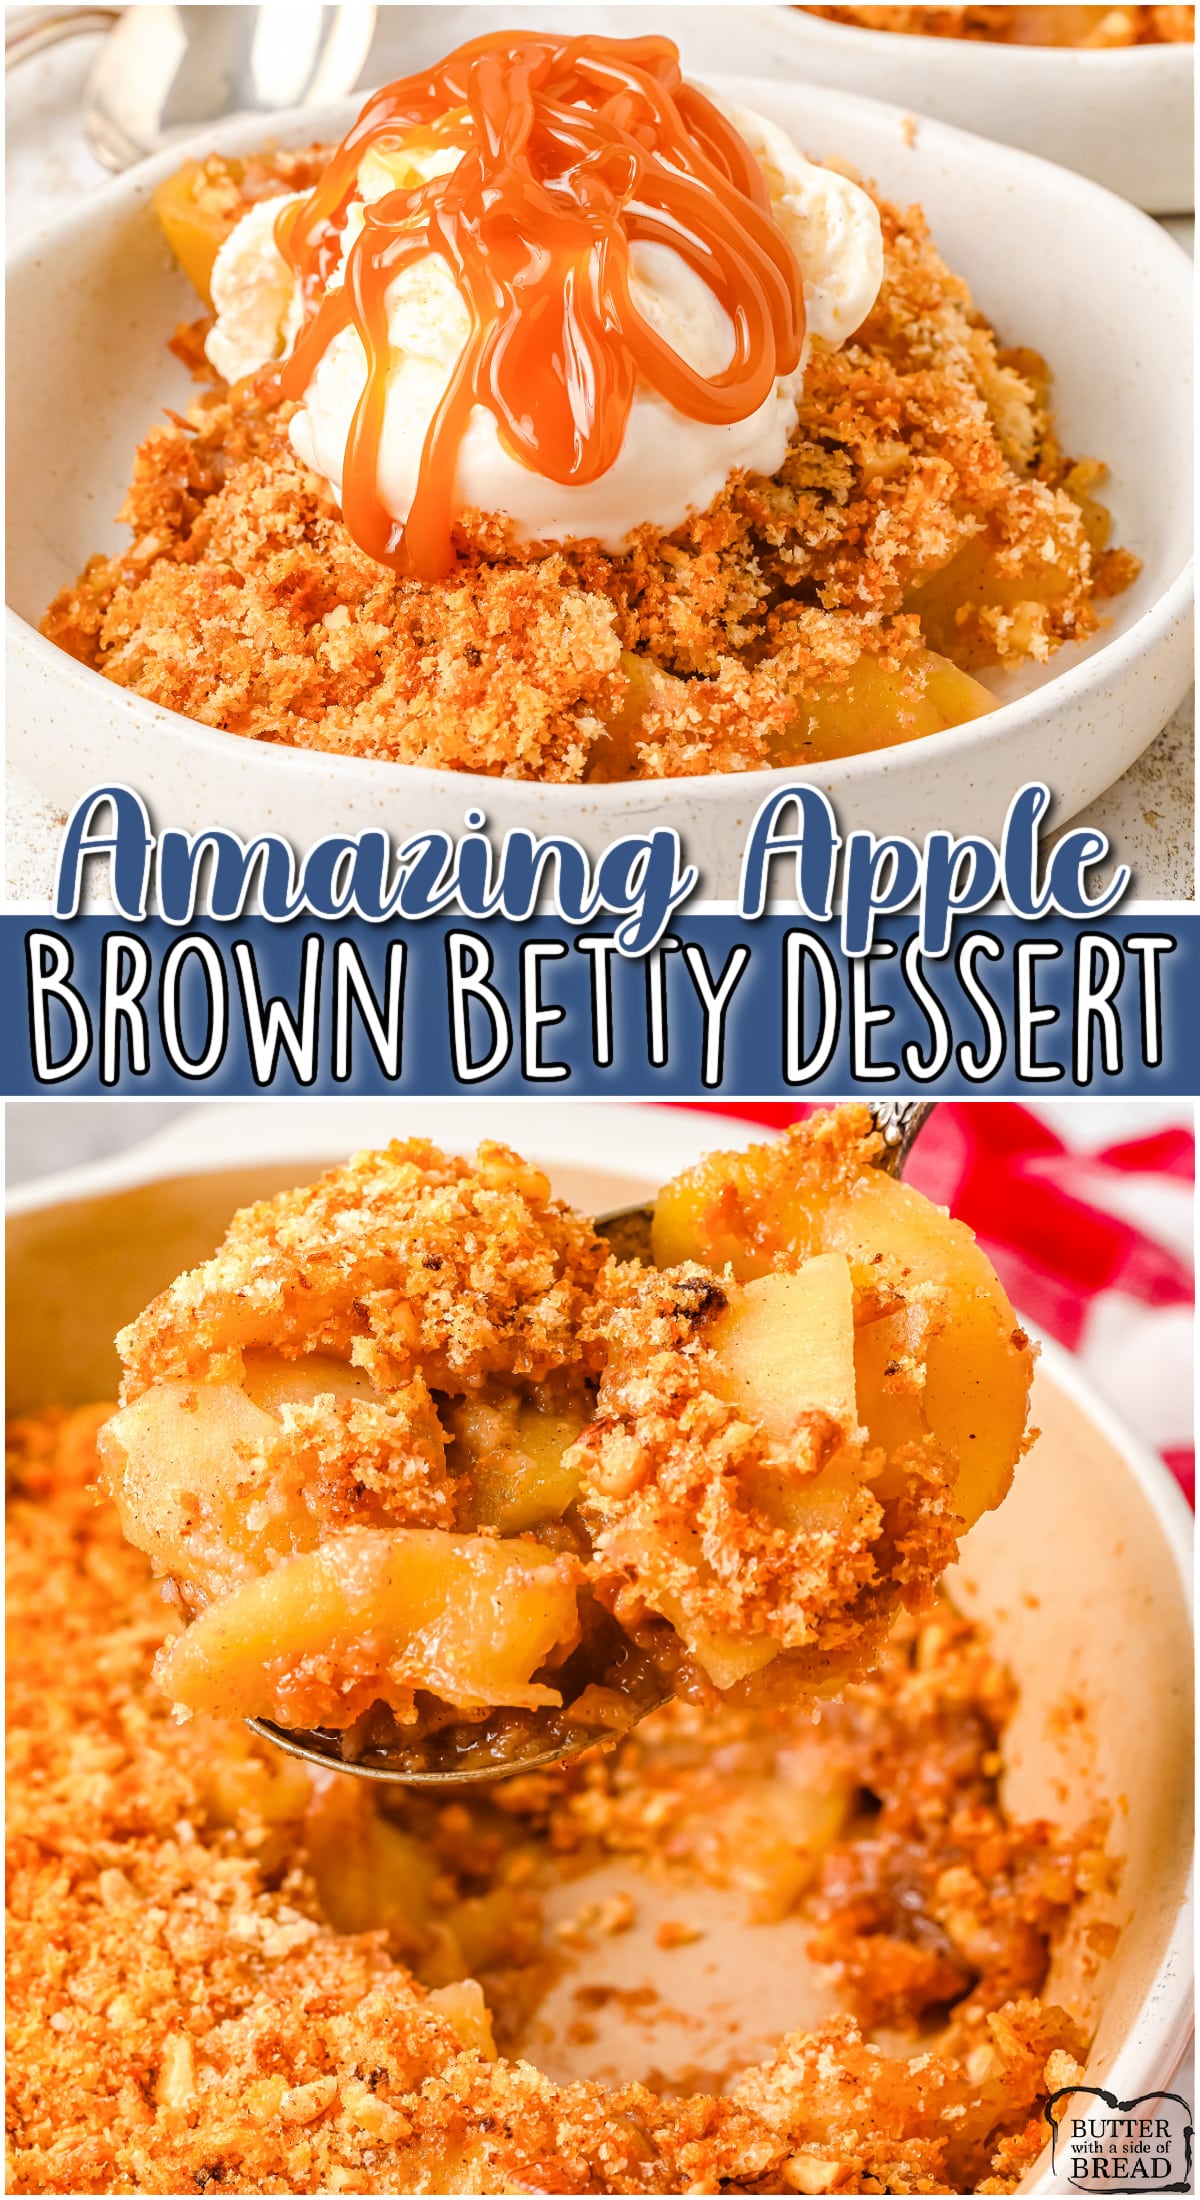 Apple Brown Betty is a traditional American dessert made with crisp apples, butter, brown sugar & toasted bread crumbs! It's a classic dish similar to apple cobbler that everyone loves! 